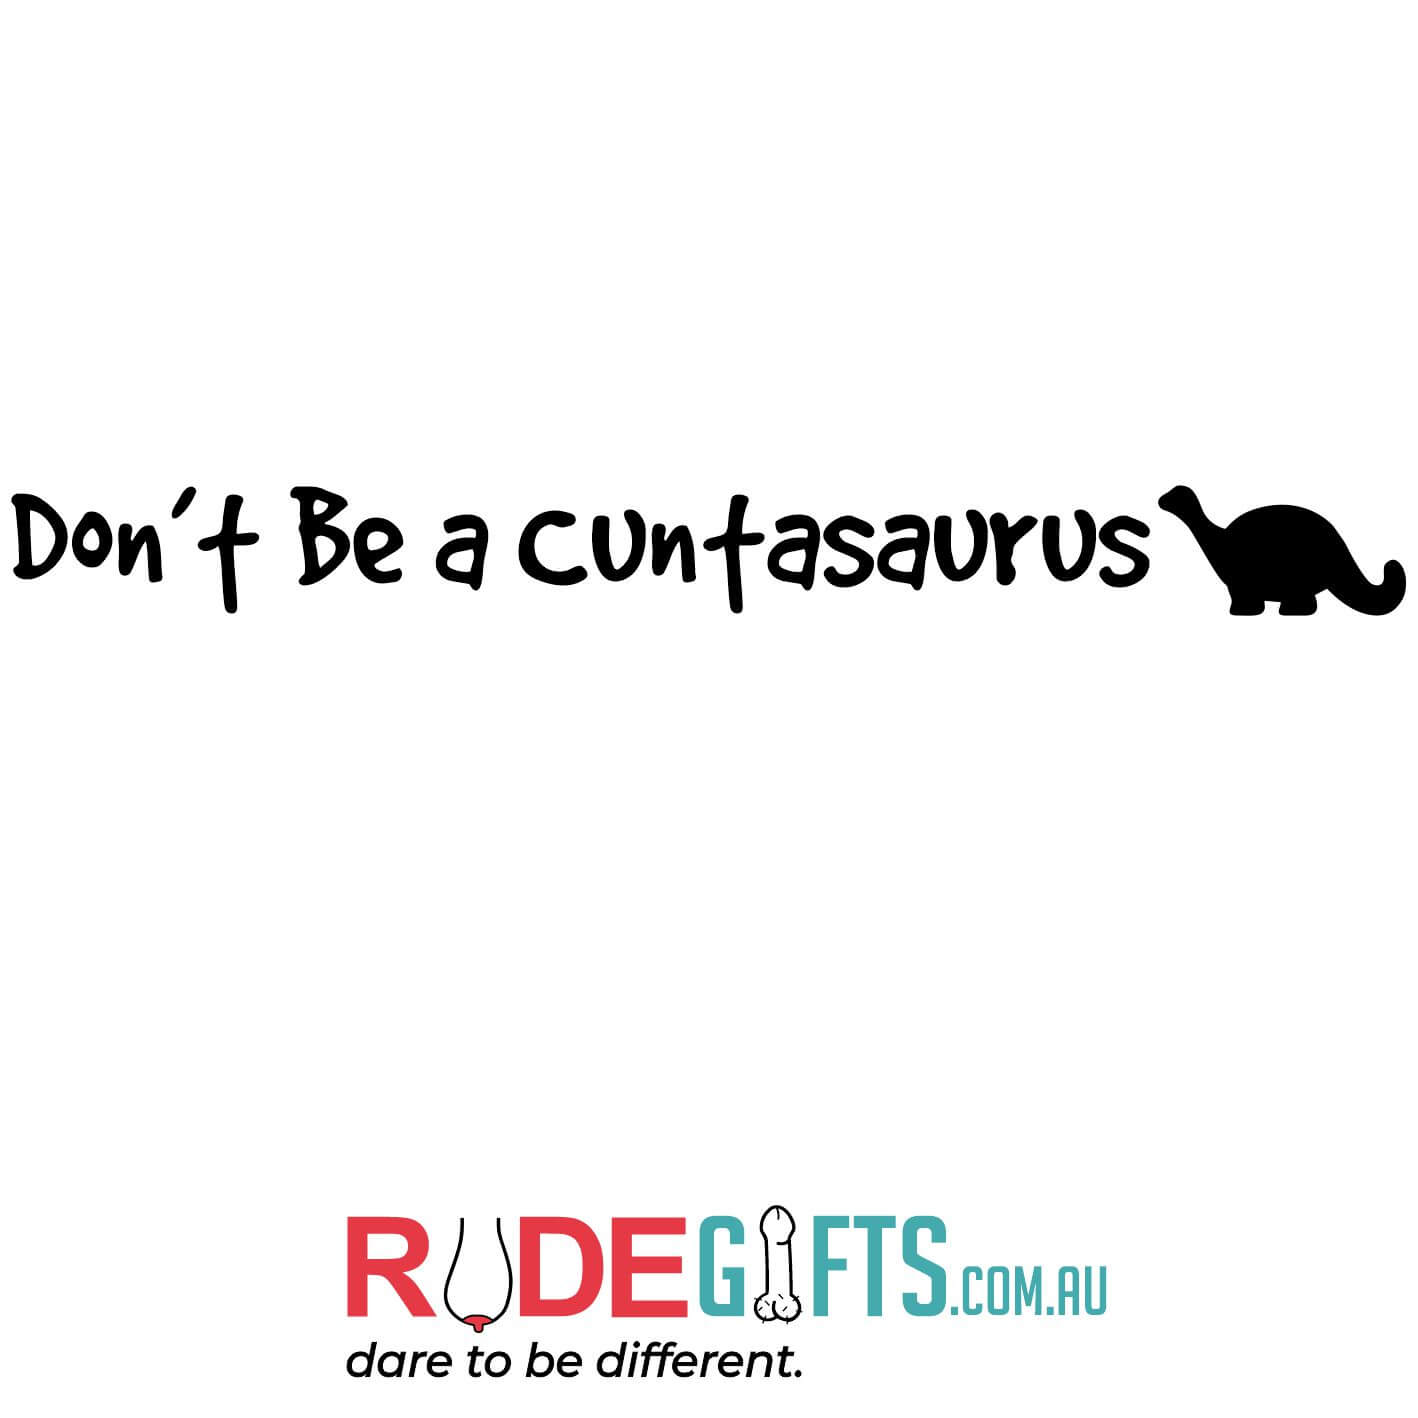 Don't be a cuntasaurus - 0